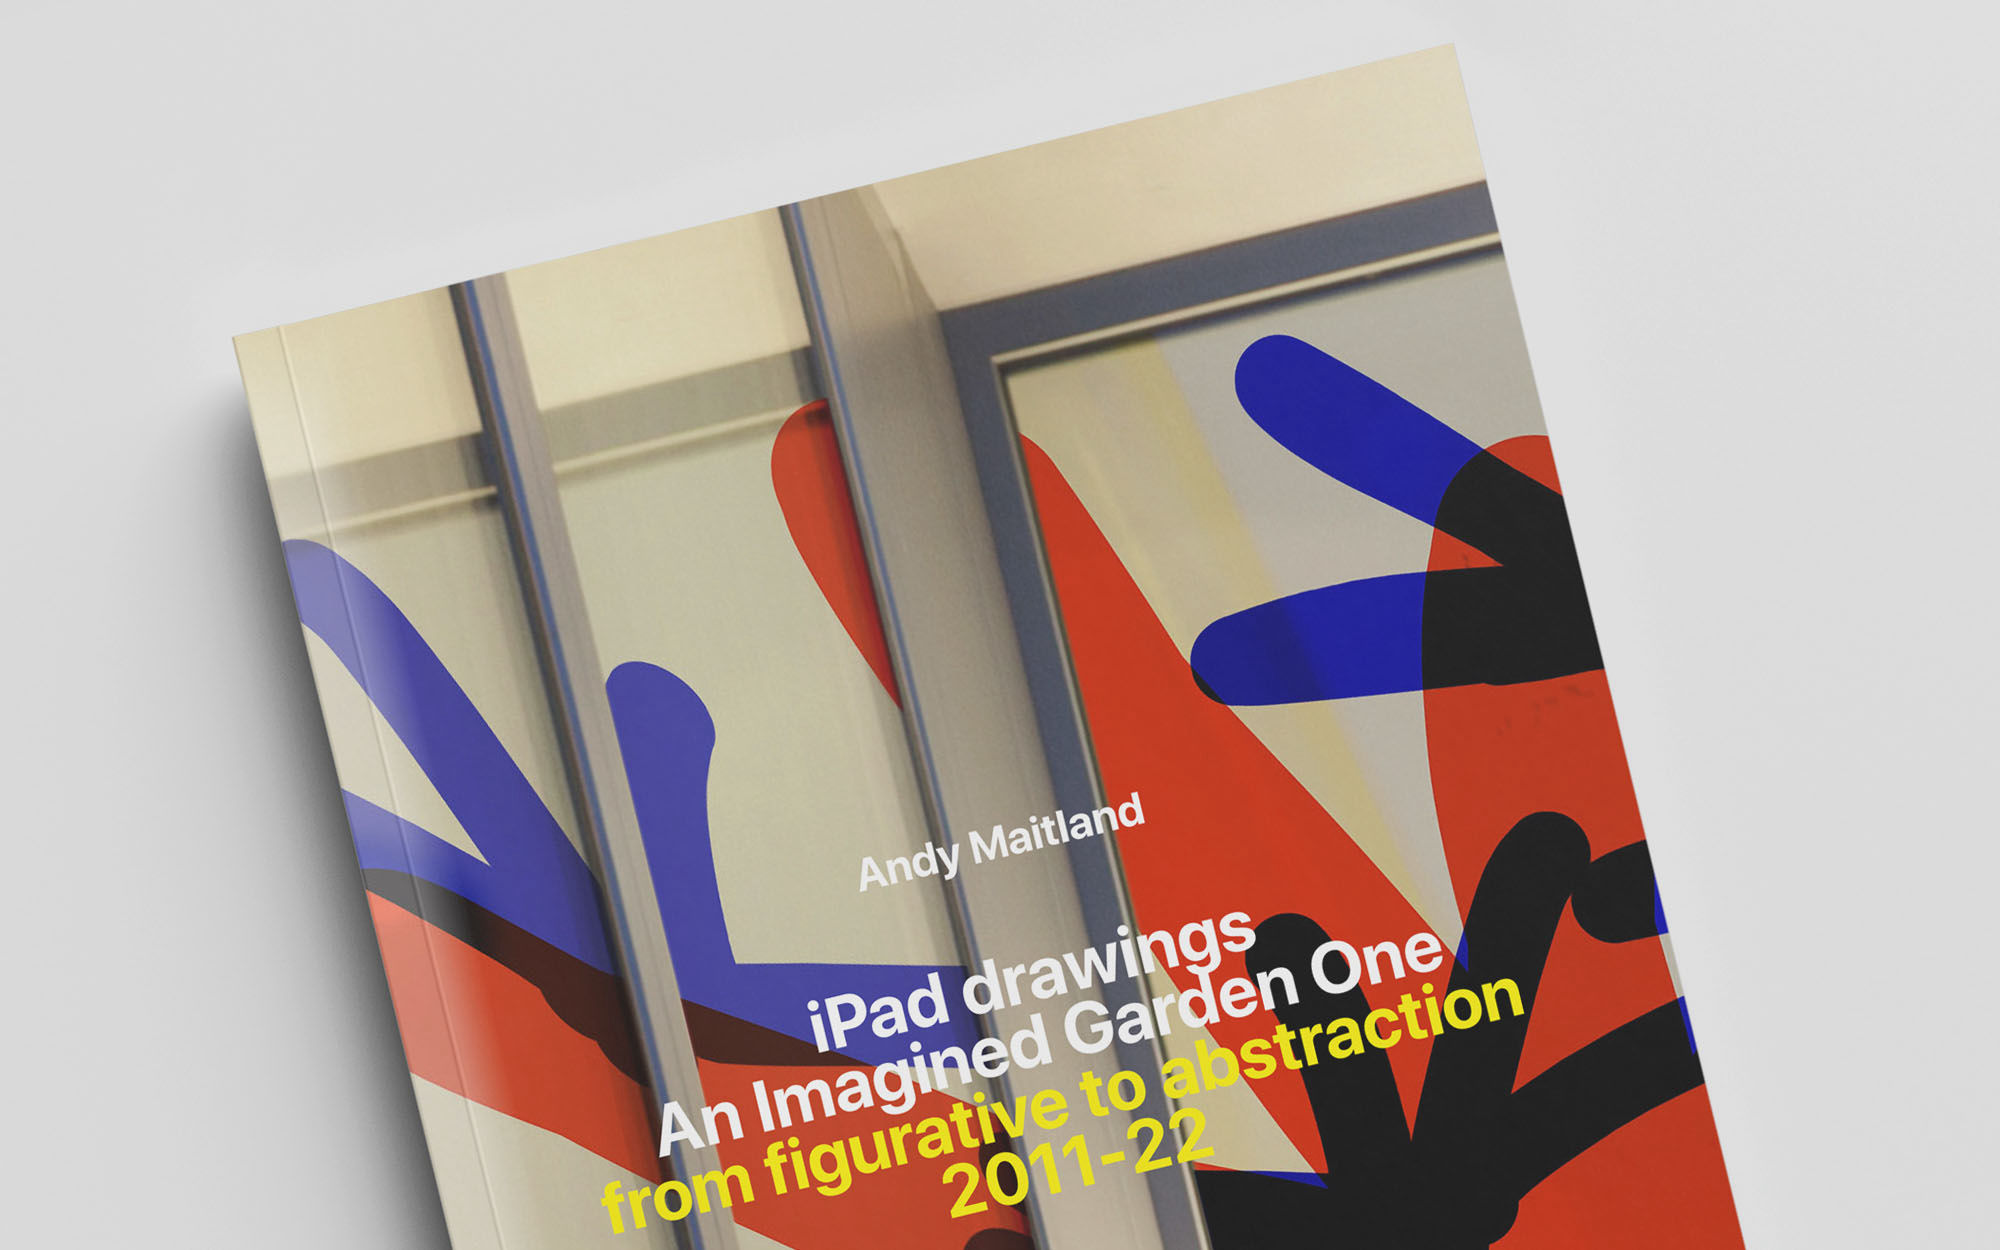 2023 - A new publication - 'Andy Maitland, iPad drawings, An Imagined Garden One, from figurative to abstraction 2011-22'